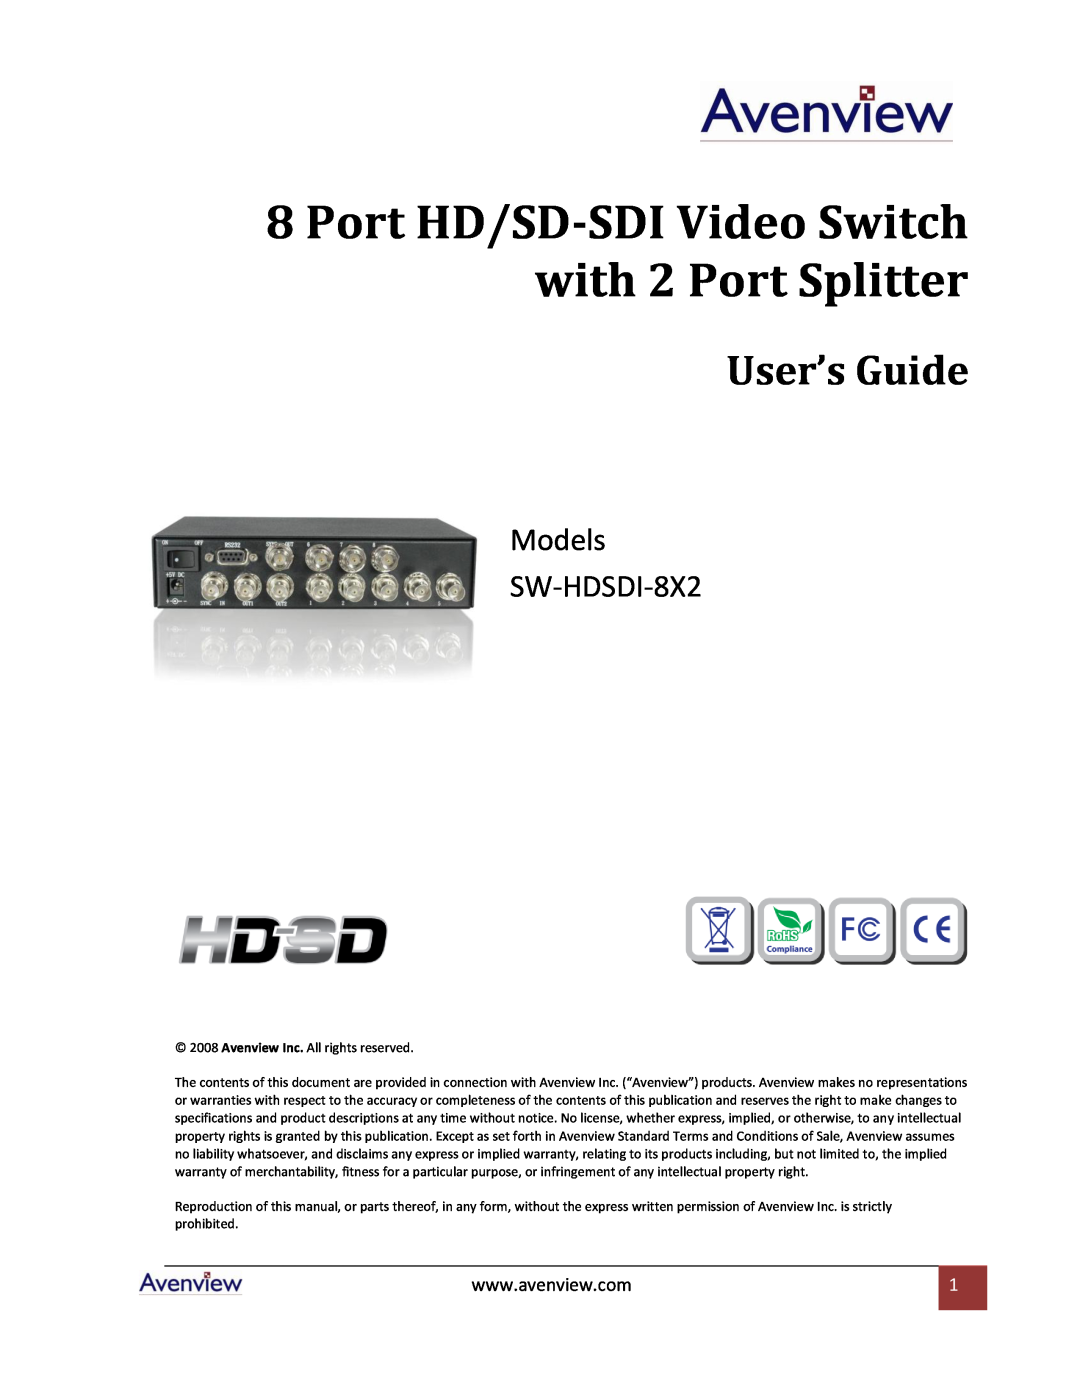 Avenview specifications Port HD/SD-SDI Video Switch with 2 Port Splitter, User’s Guide, Models SW-HDSDI-8X2 